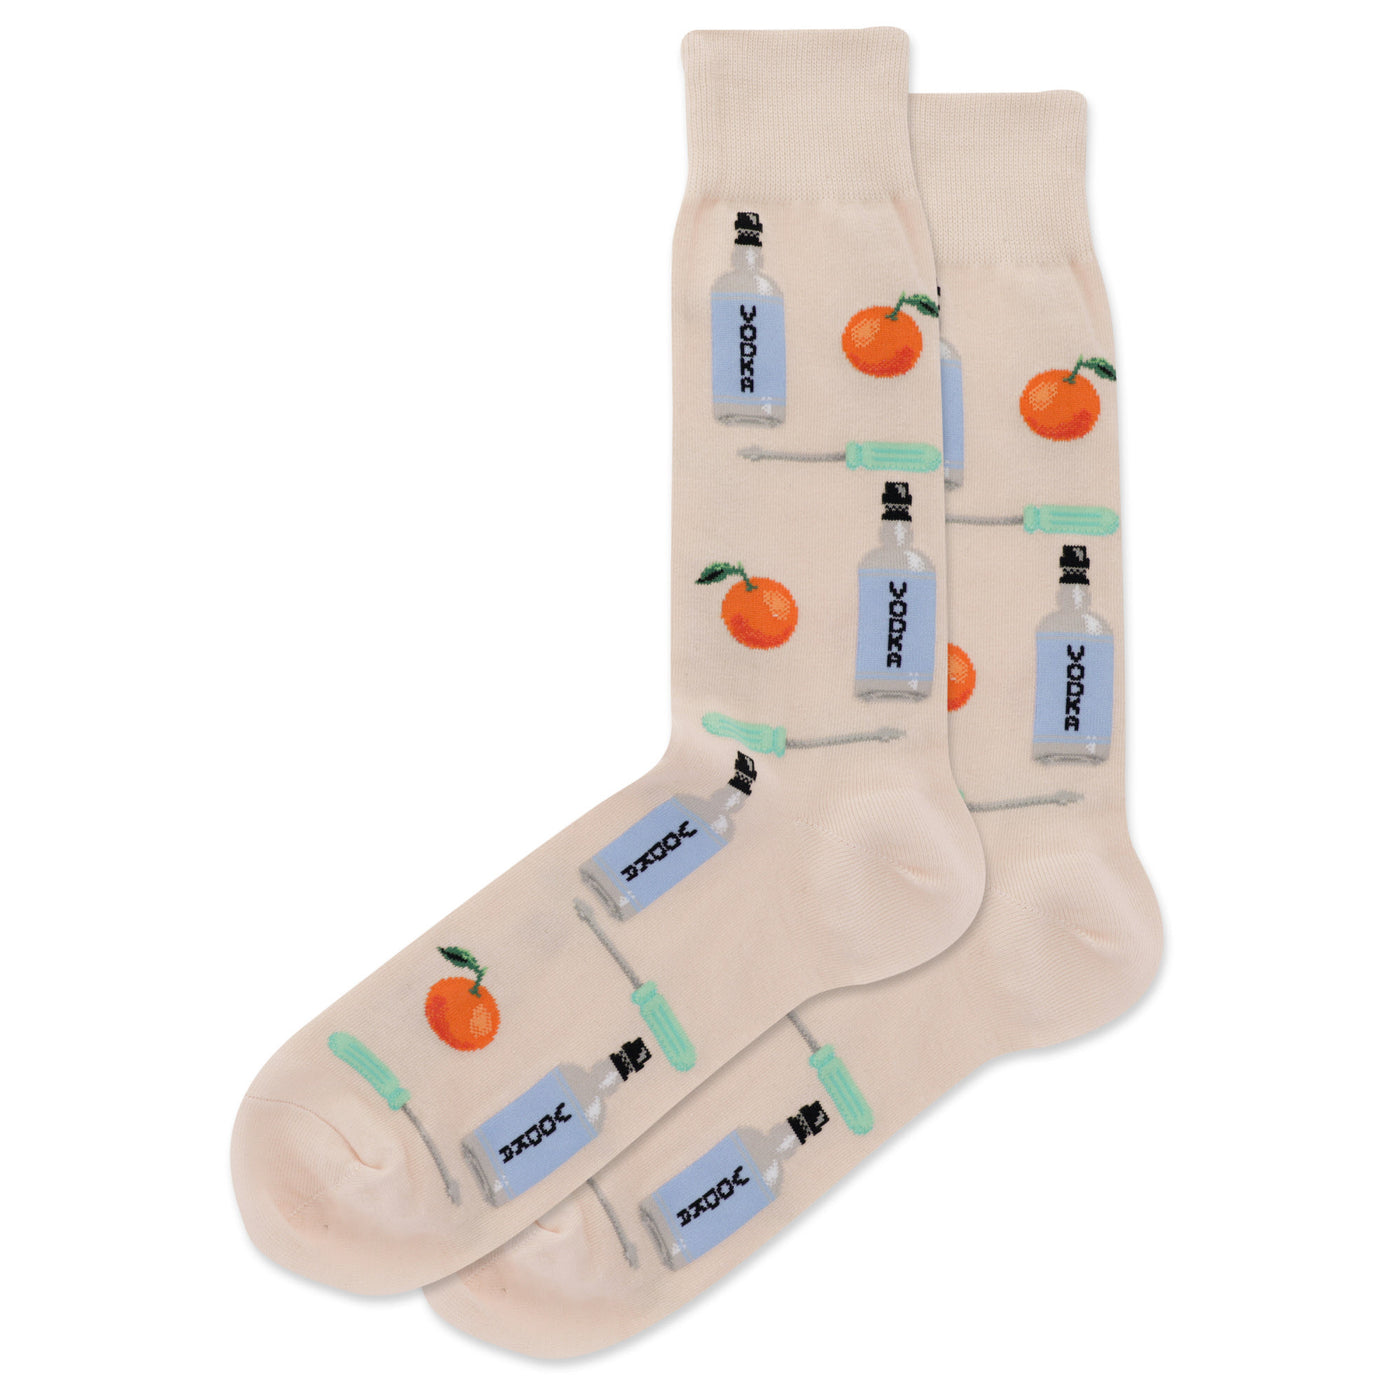 "Screwdriver" Cotton Crew  Socks by Hot Sox